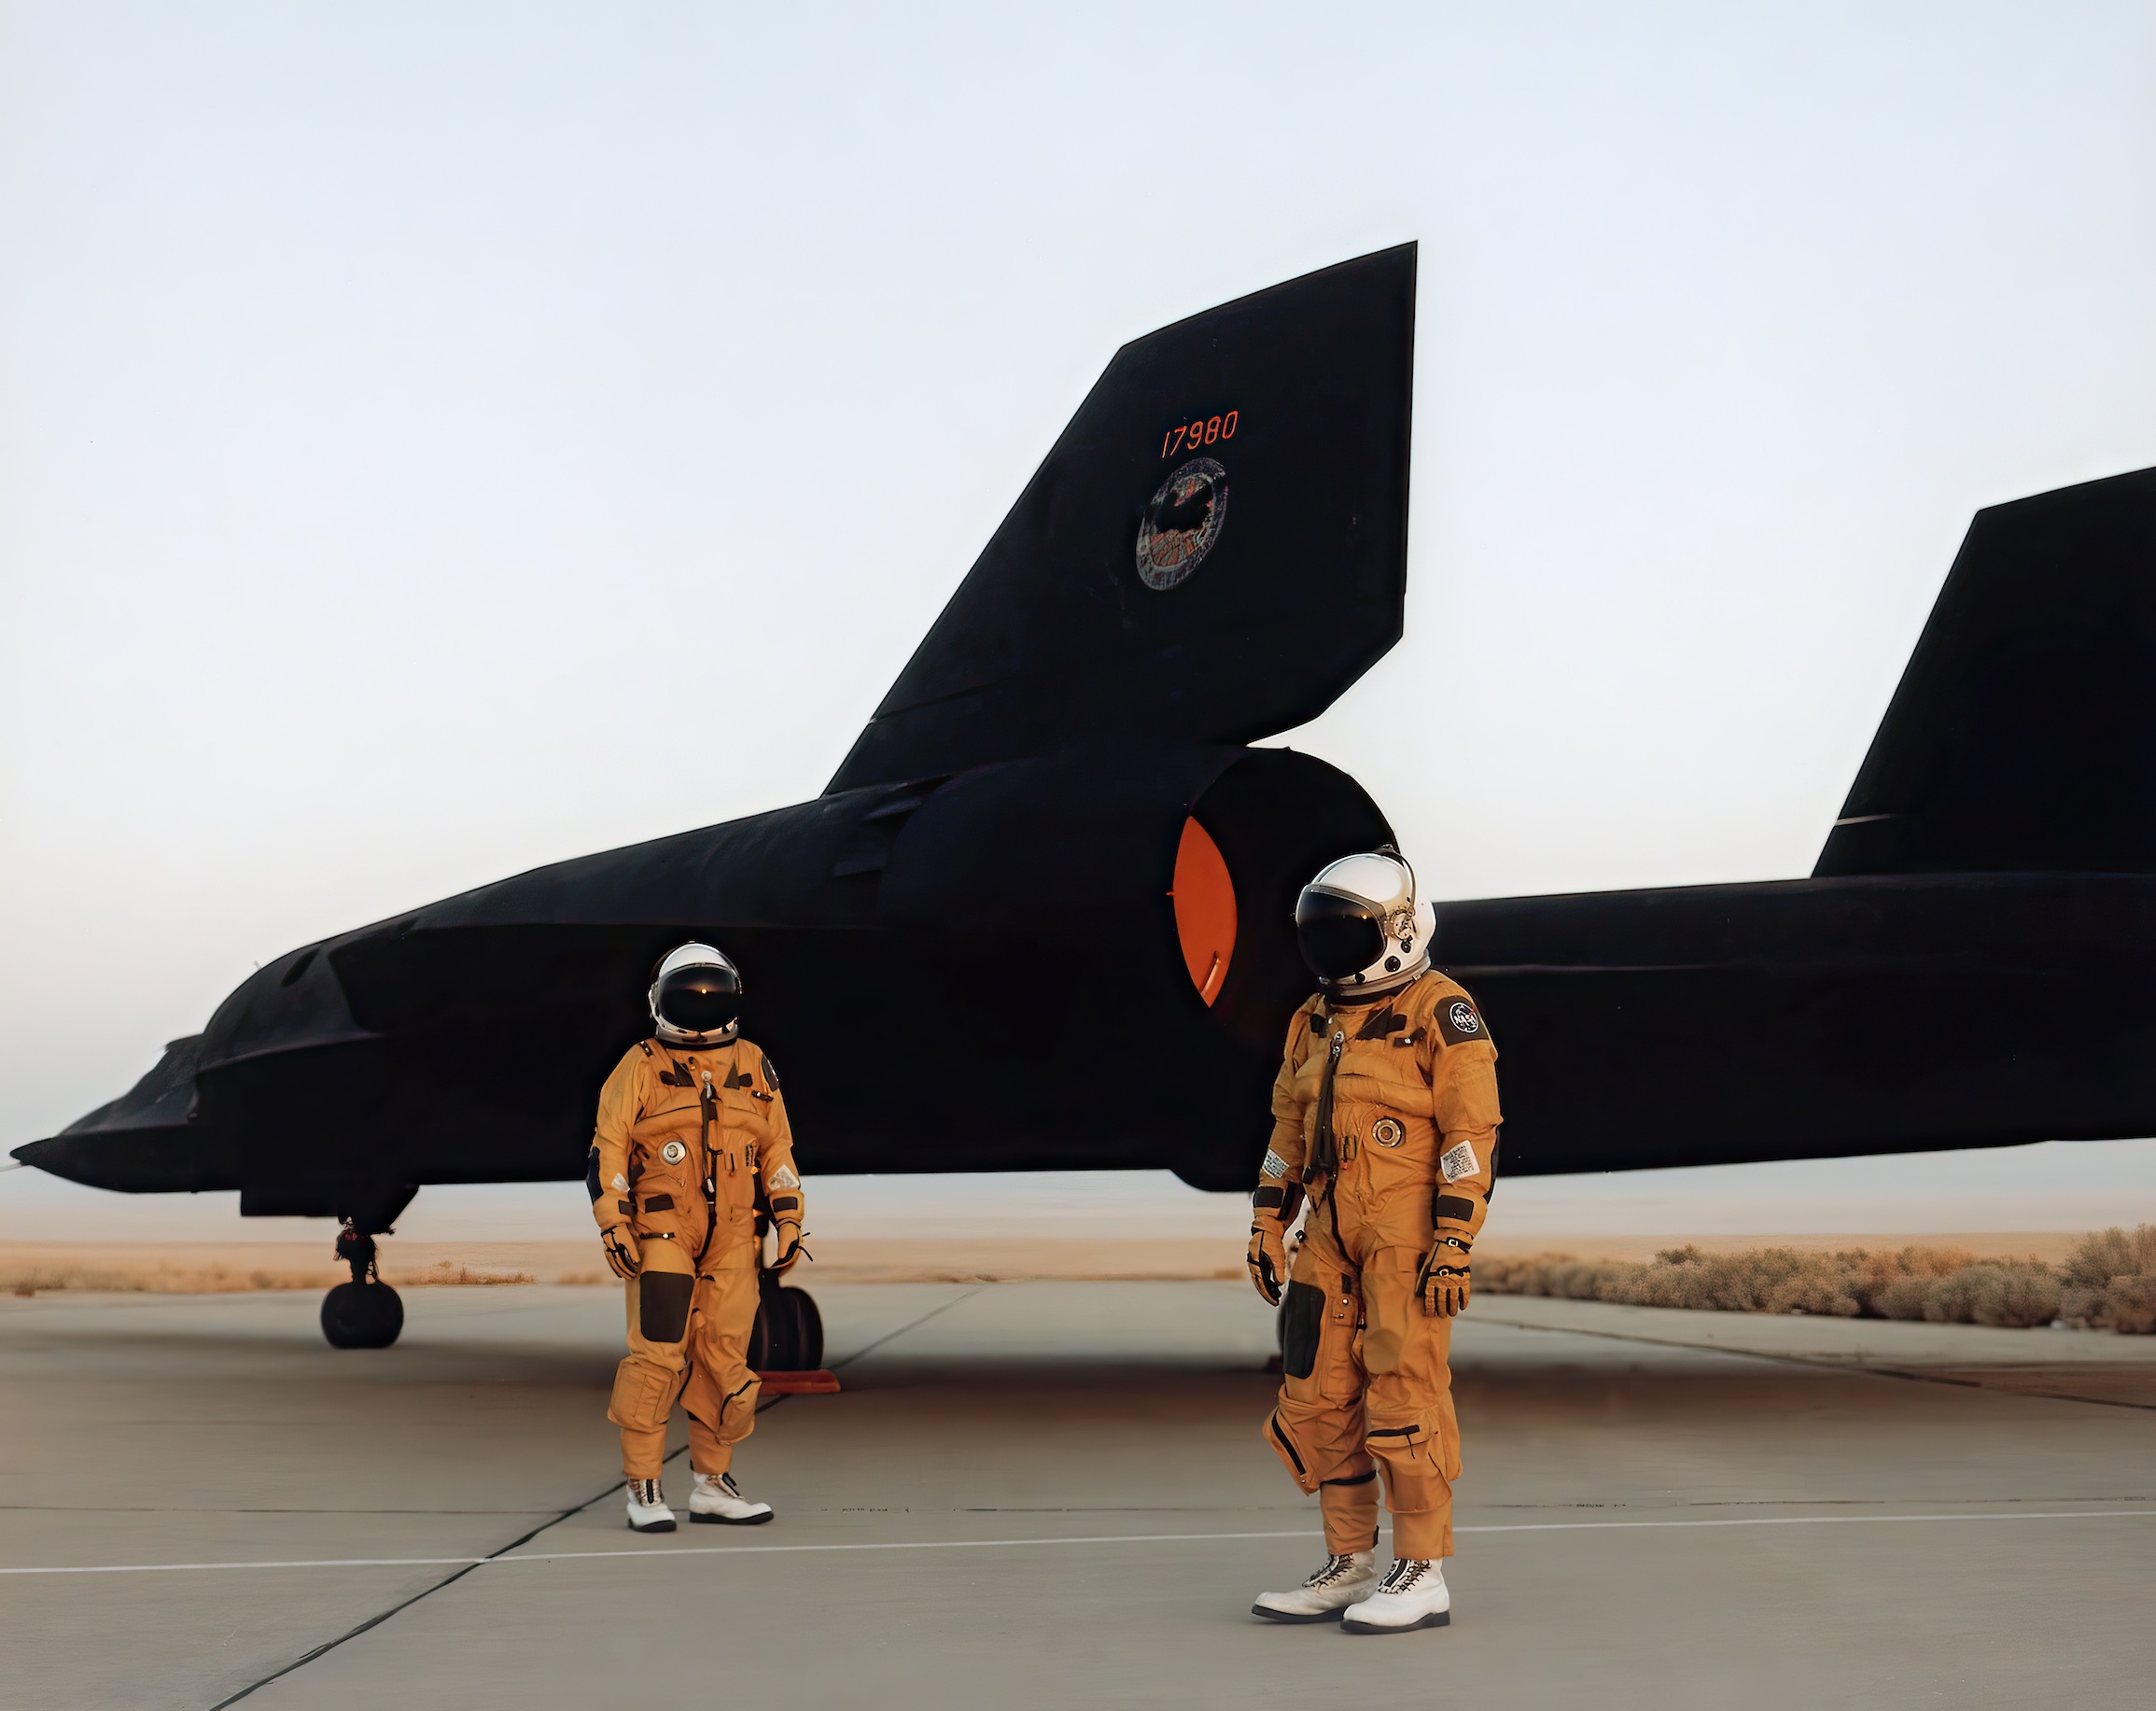 The crew of a NASA Lockheed SR-71 Blackbird standing by the aircraft in their pressurized flight suits